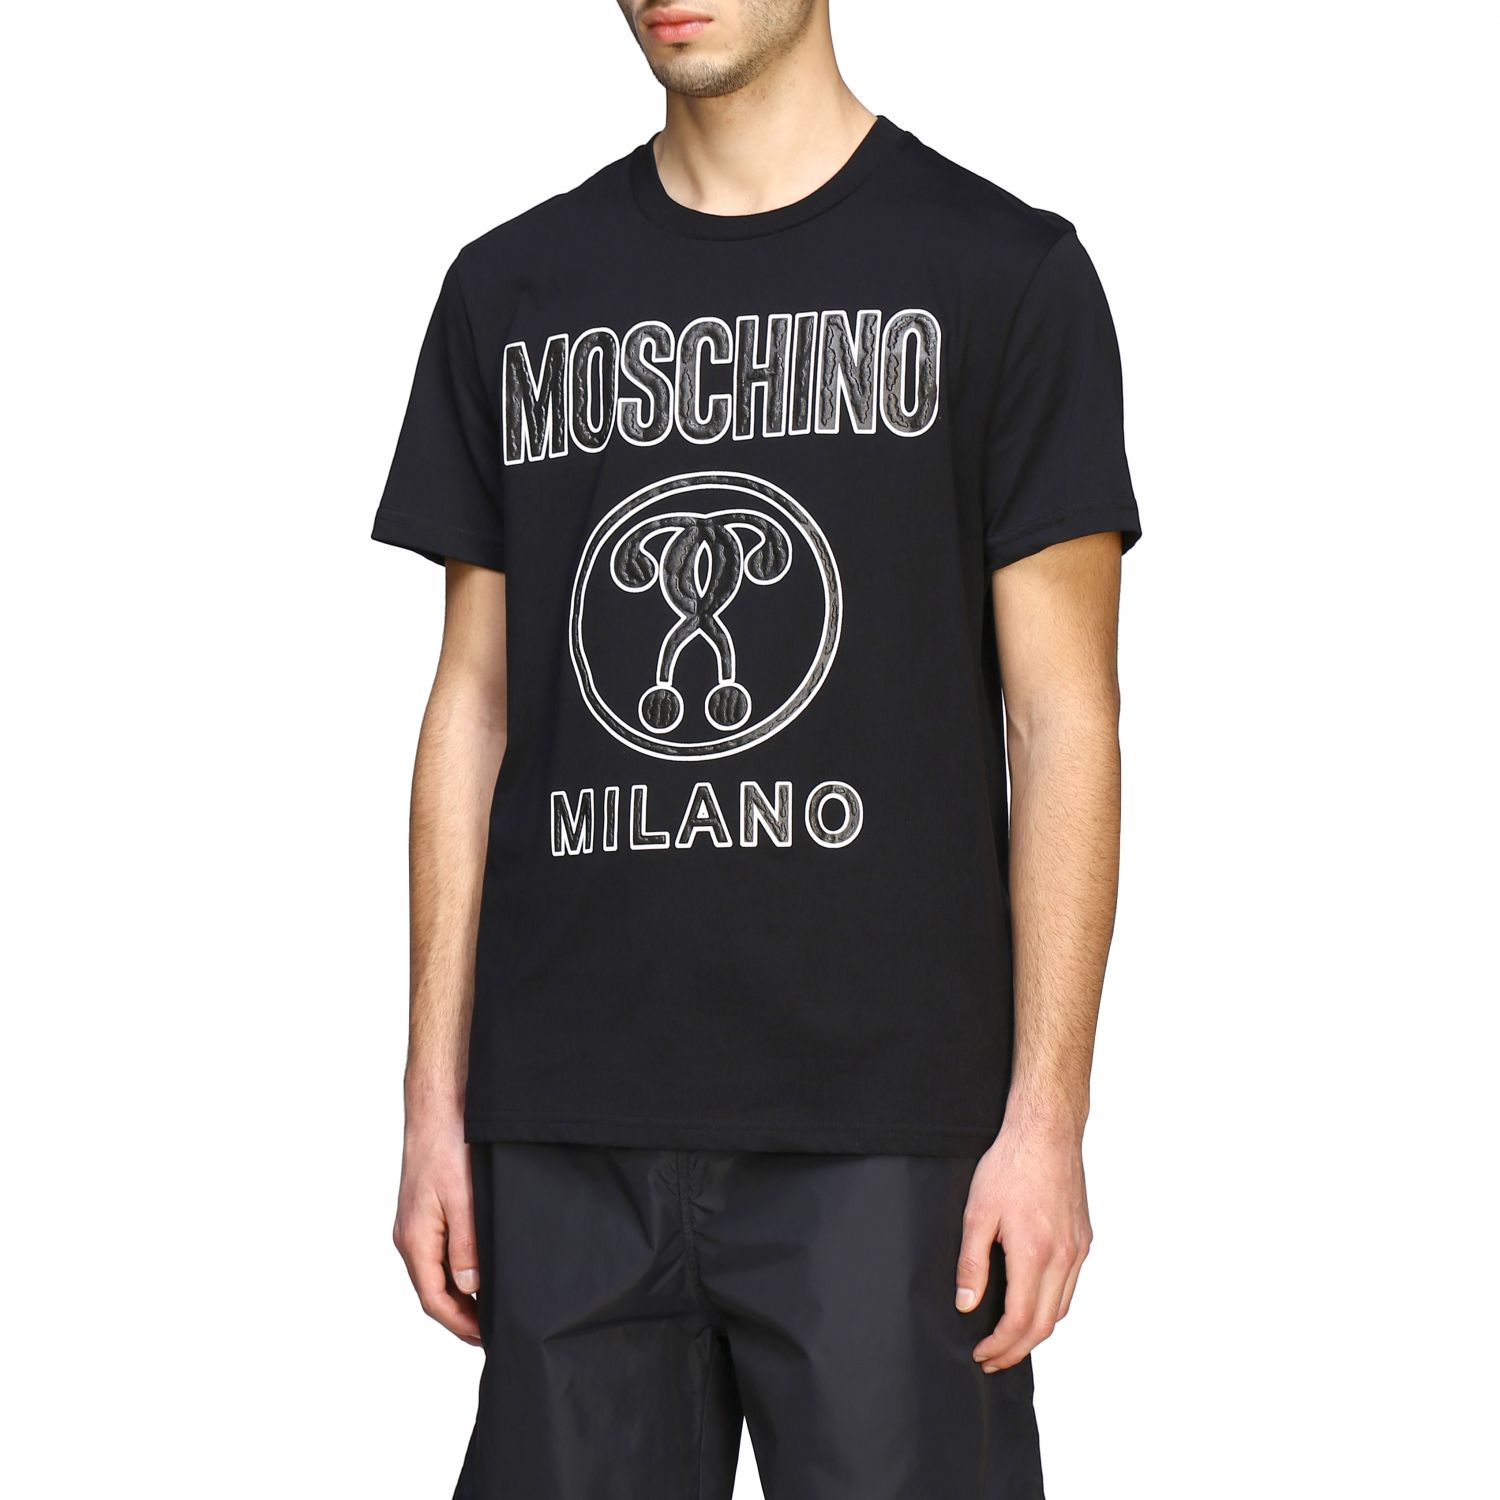 Moschino Couture Outlet: T-shirt men - Black | Moschino Couture t-shirt ...